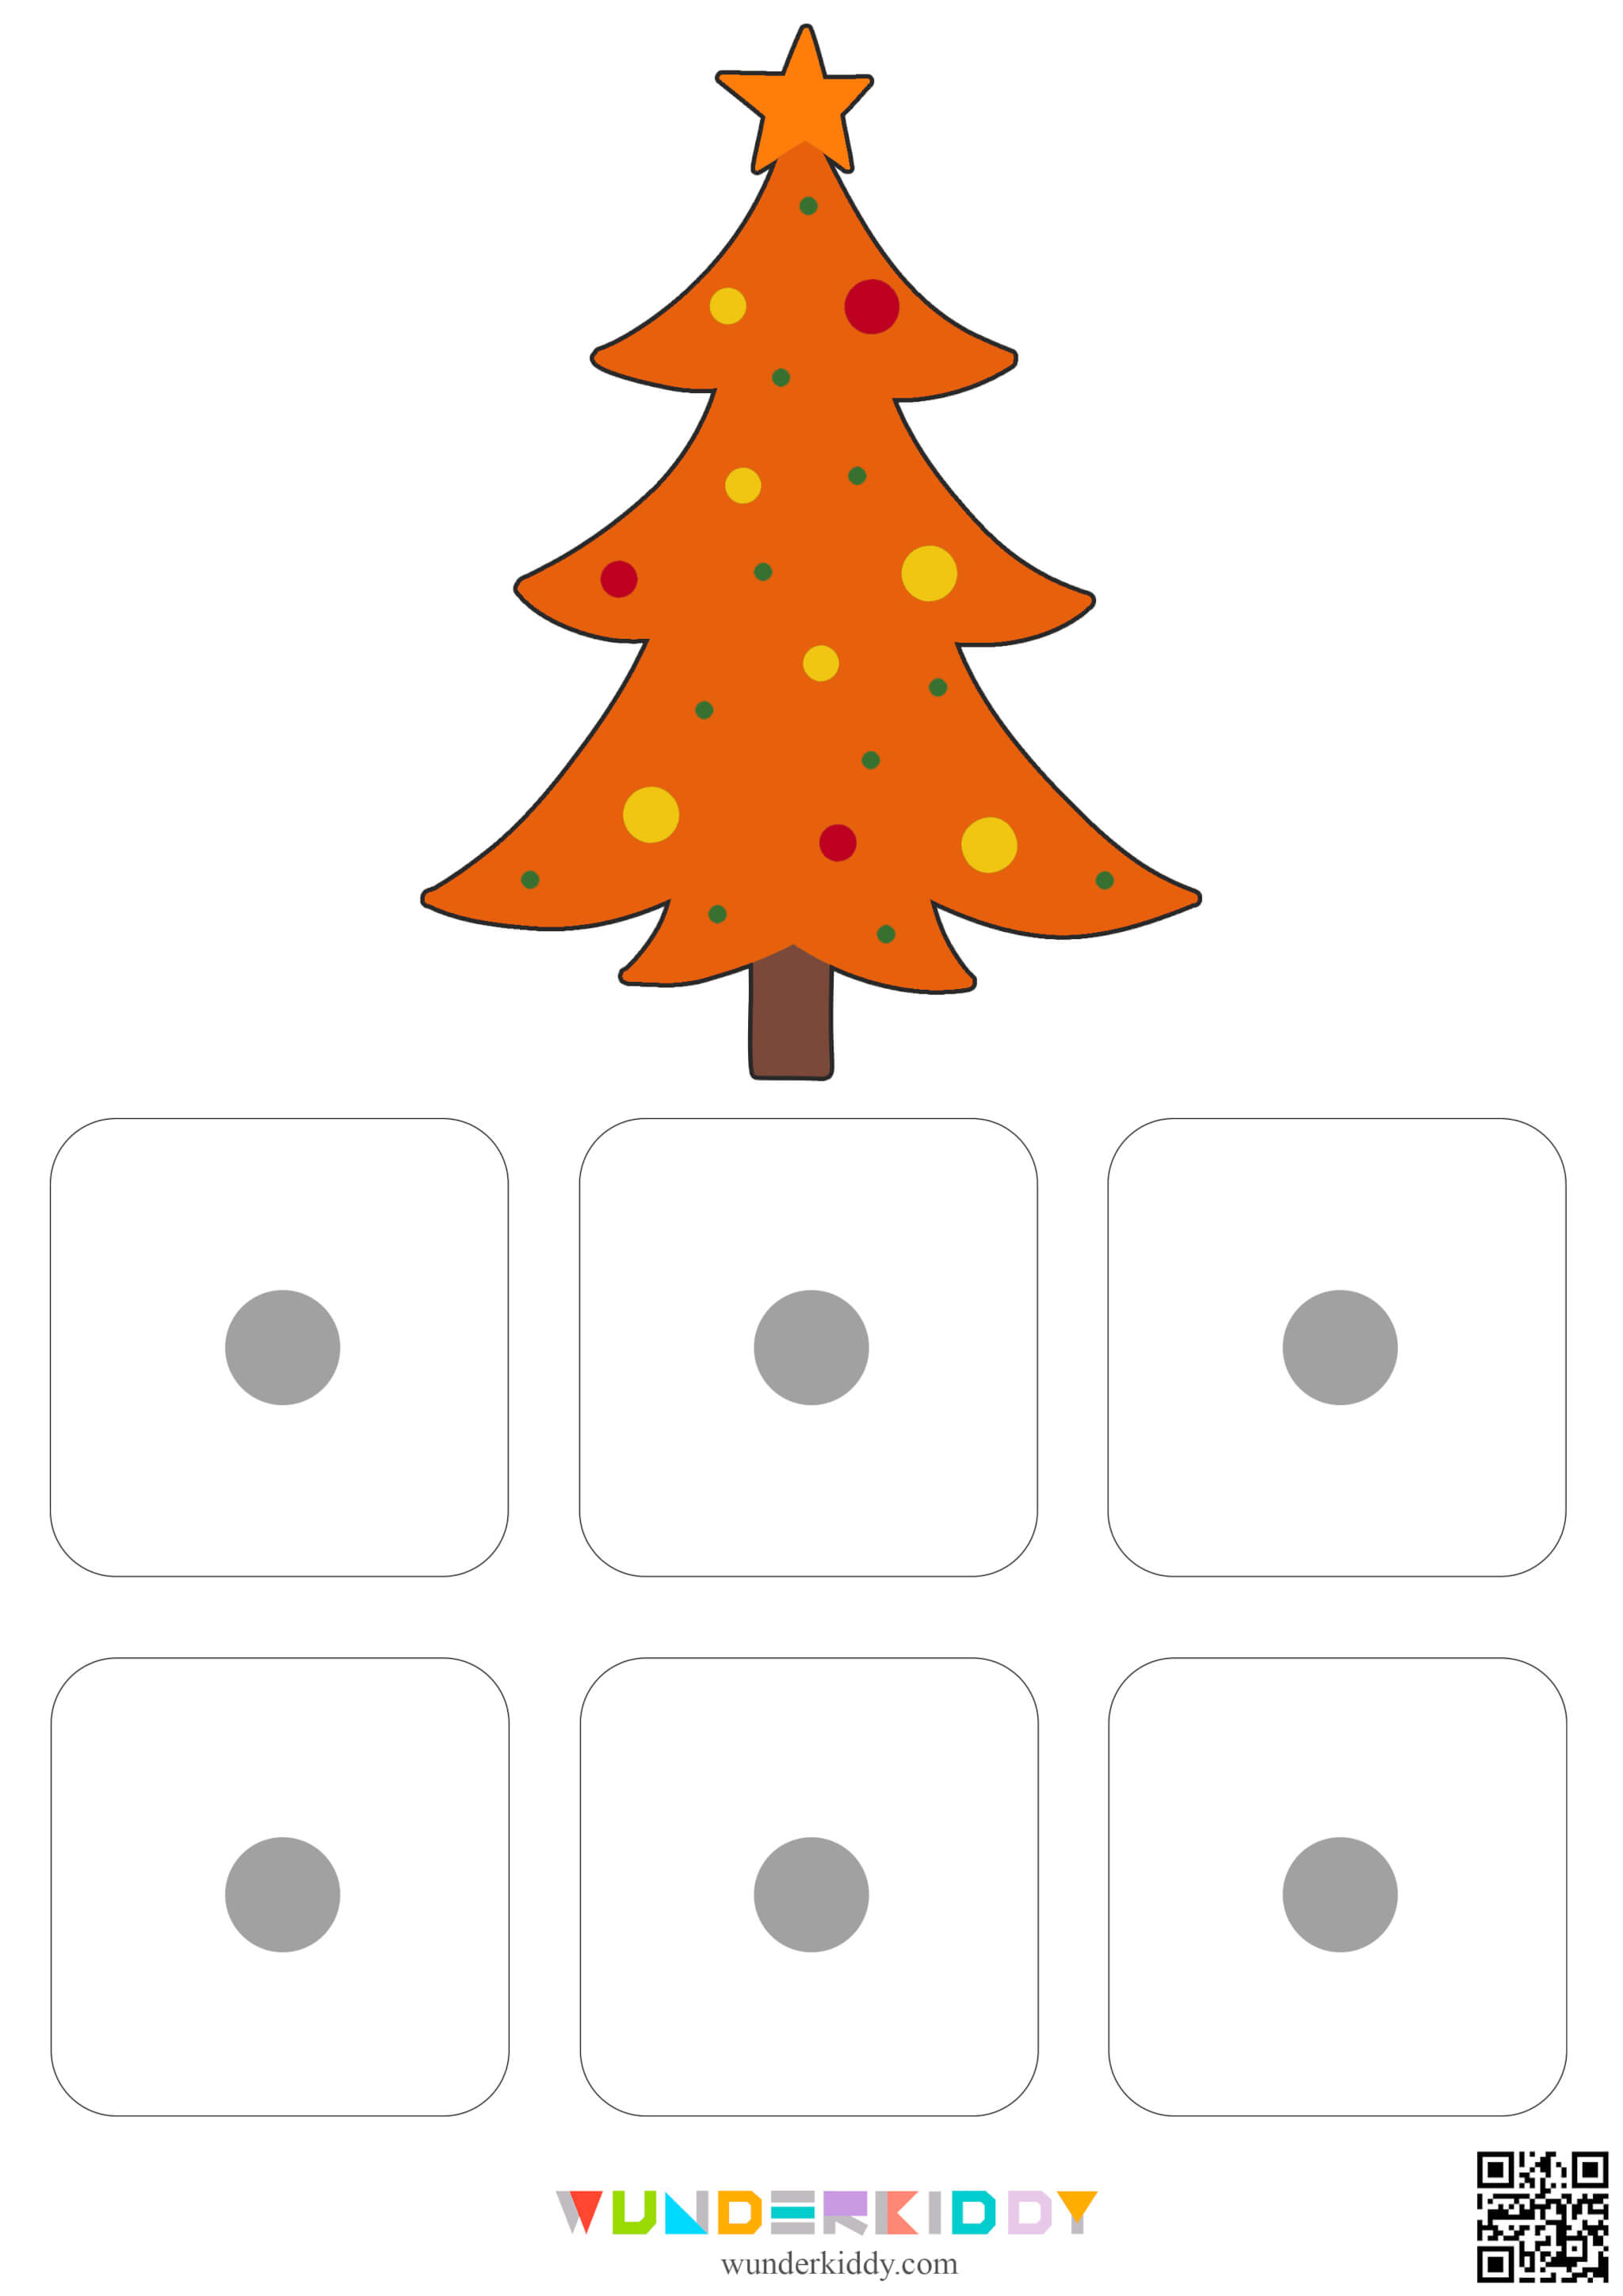 Christmas Color Sorting Activity - Image 5